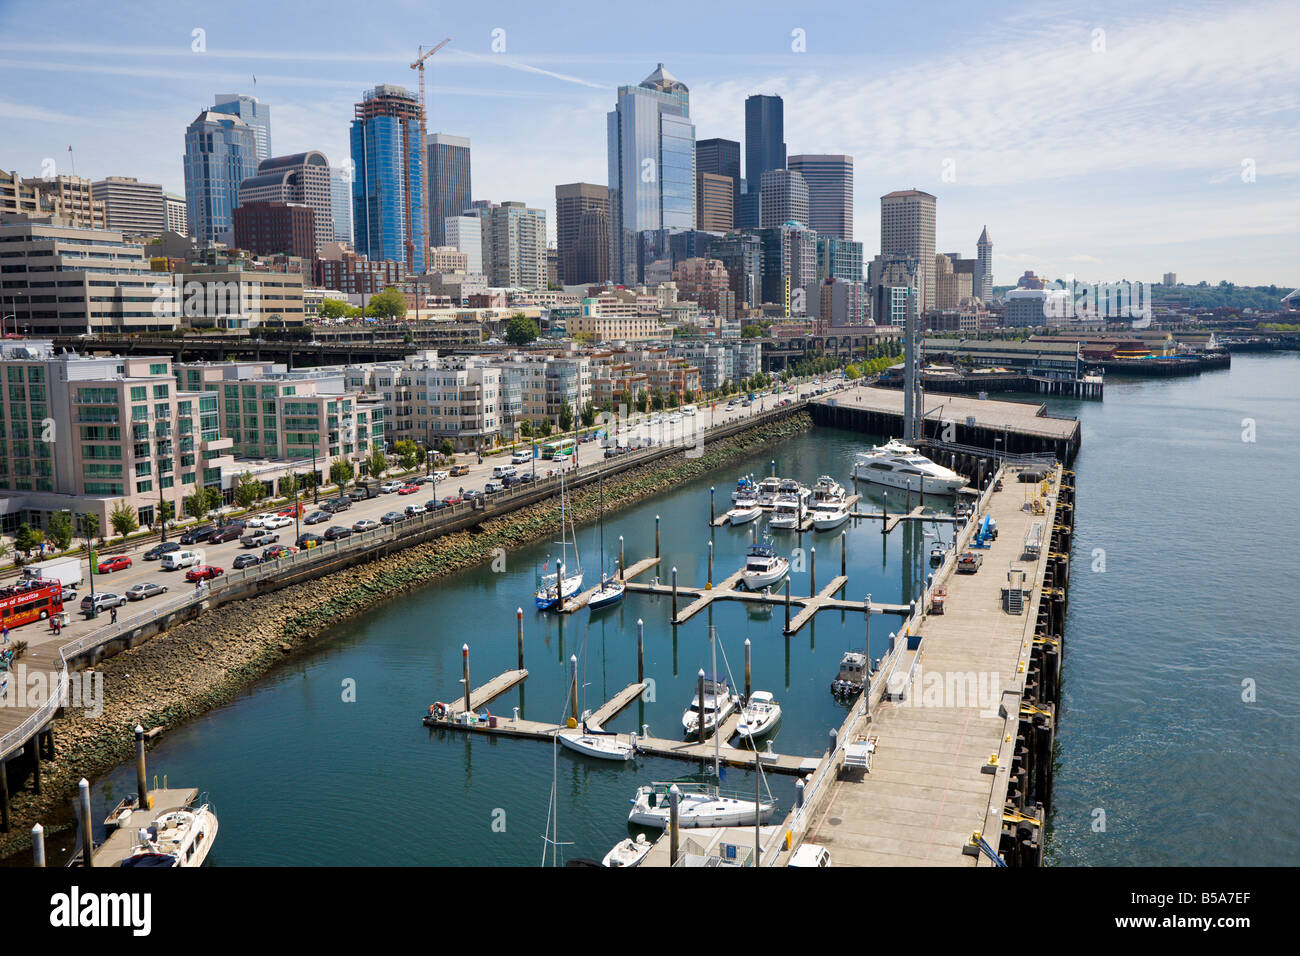 Small marina in front of skyscrapers along waterfront area of Seattle Washington Stock Photo